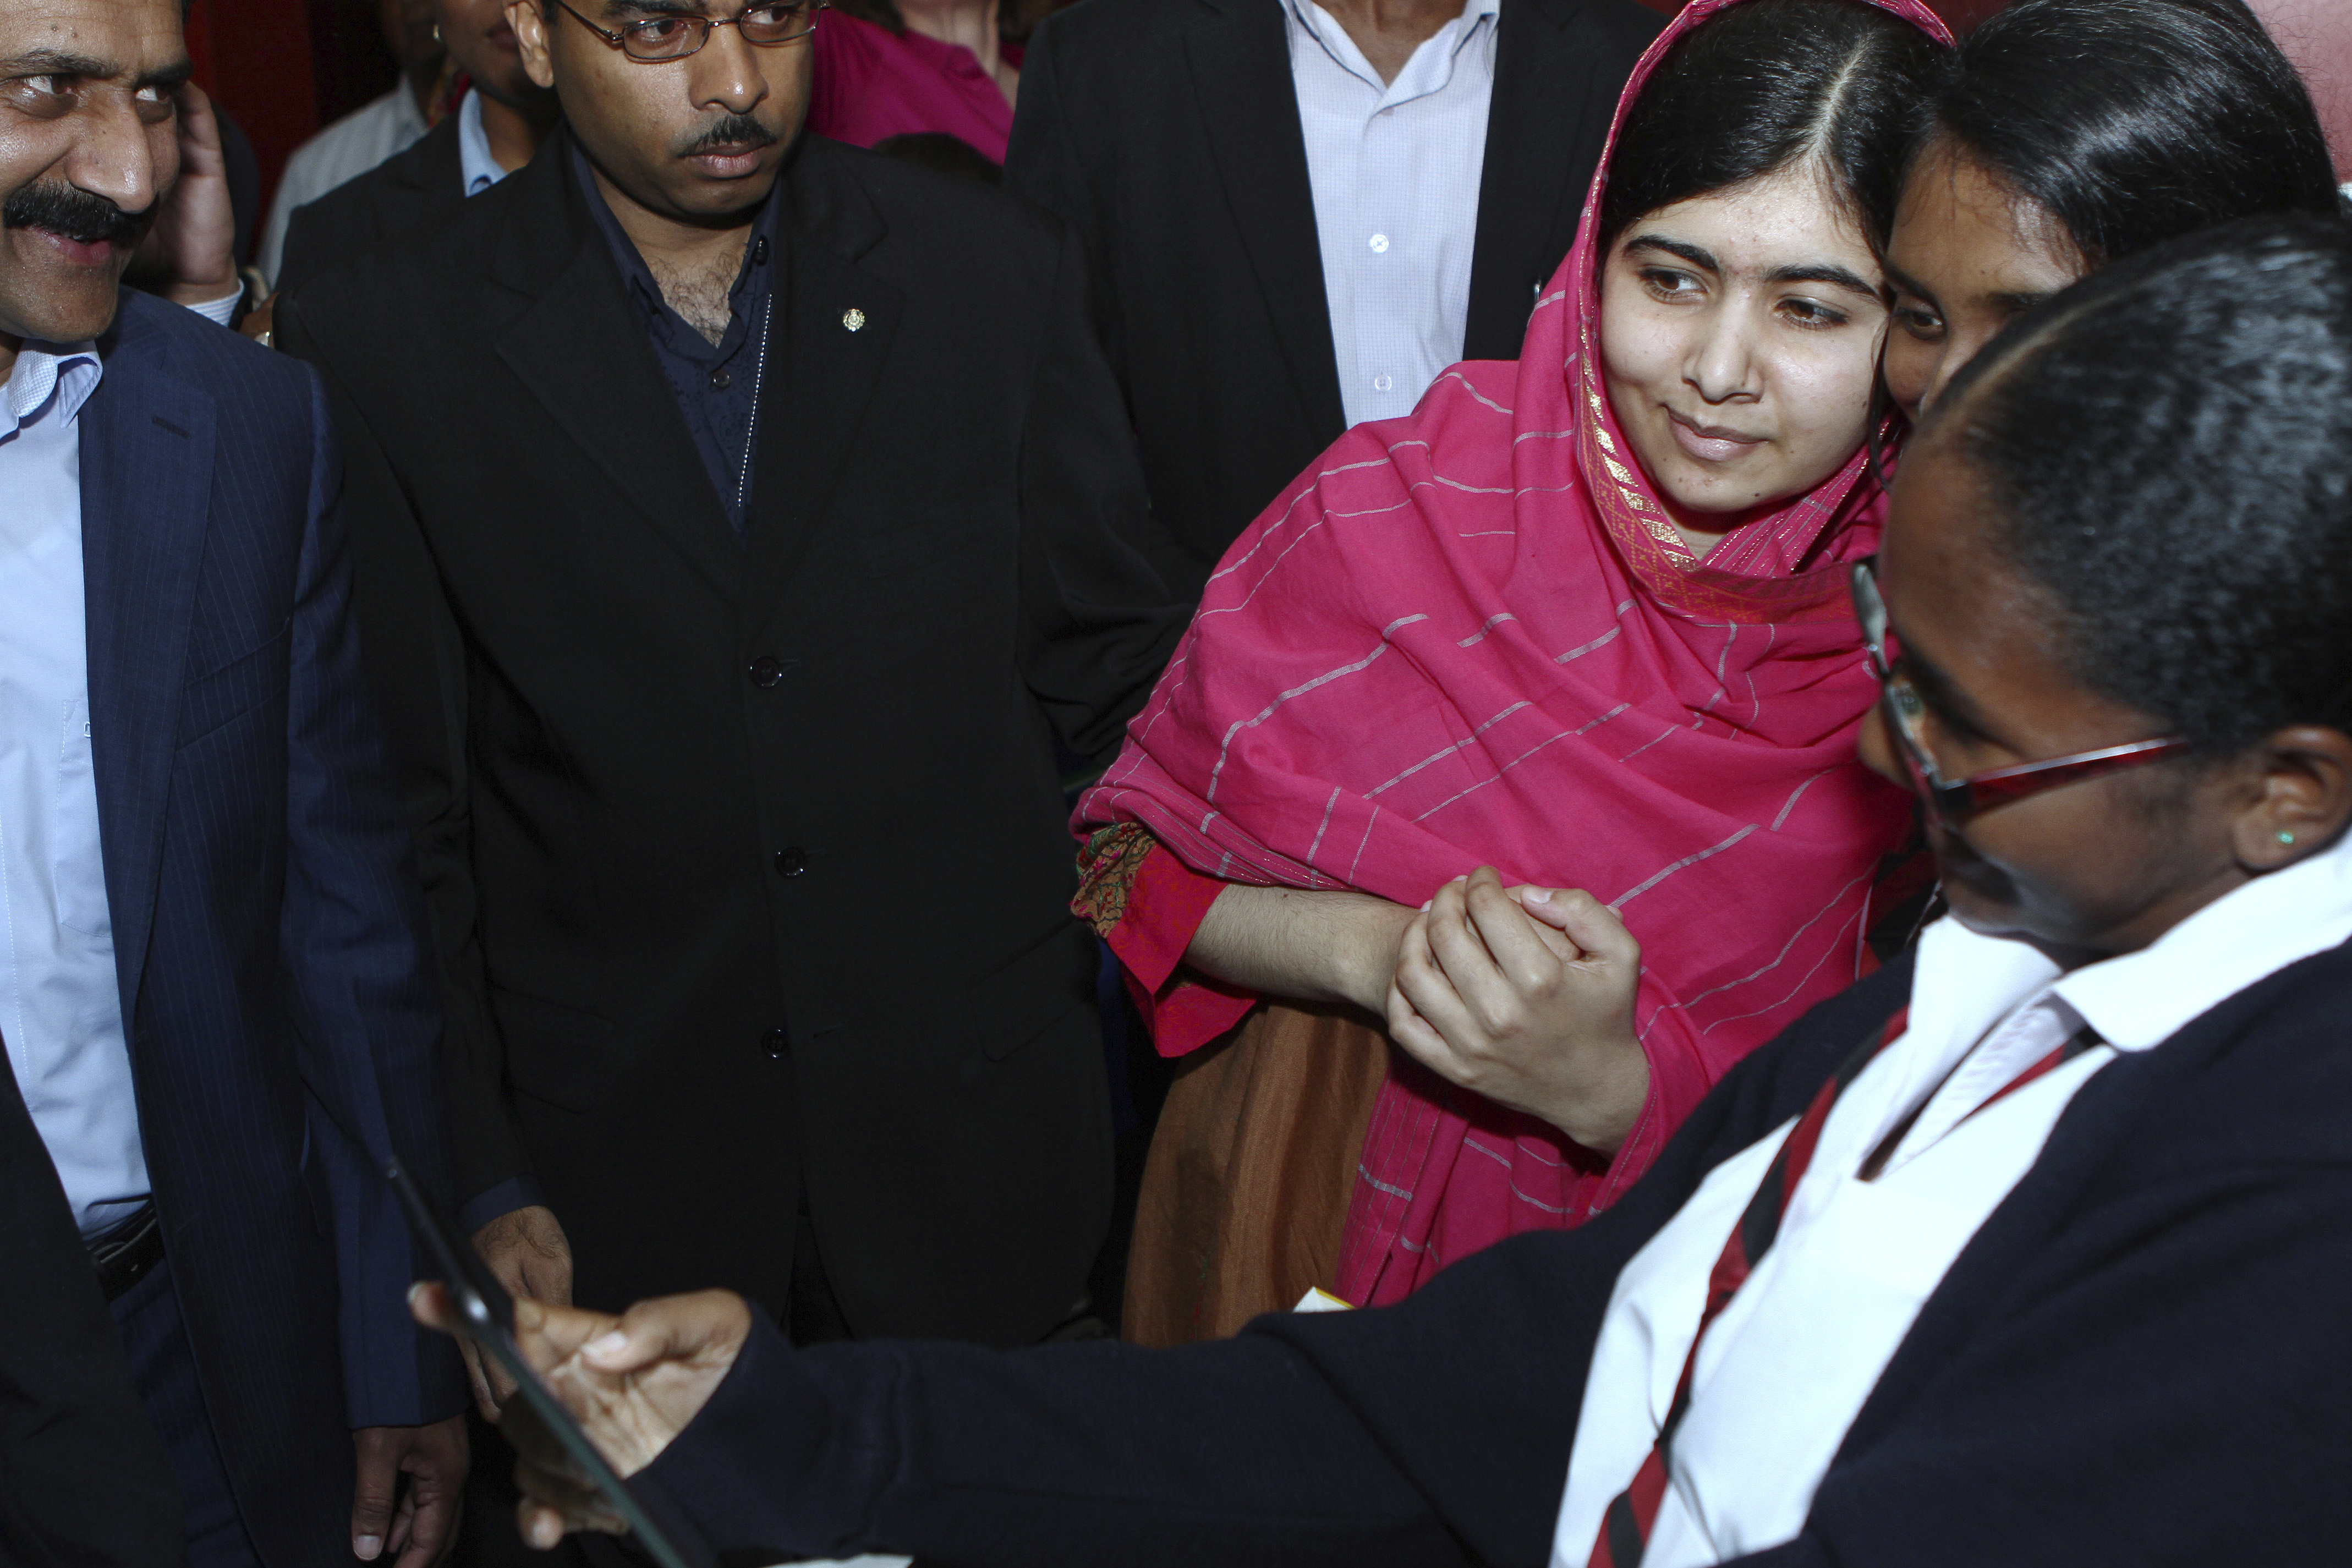 Malala Yousafzai poses for a selfie with admirers at the National Academy for the Performing Arts on July 30, 2014 in Port of Spain, Trinidad. (Sean Drakes/CON—LatinContent/Getty Images)